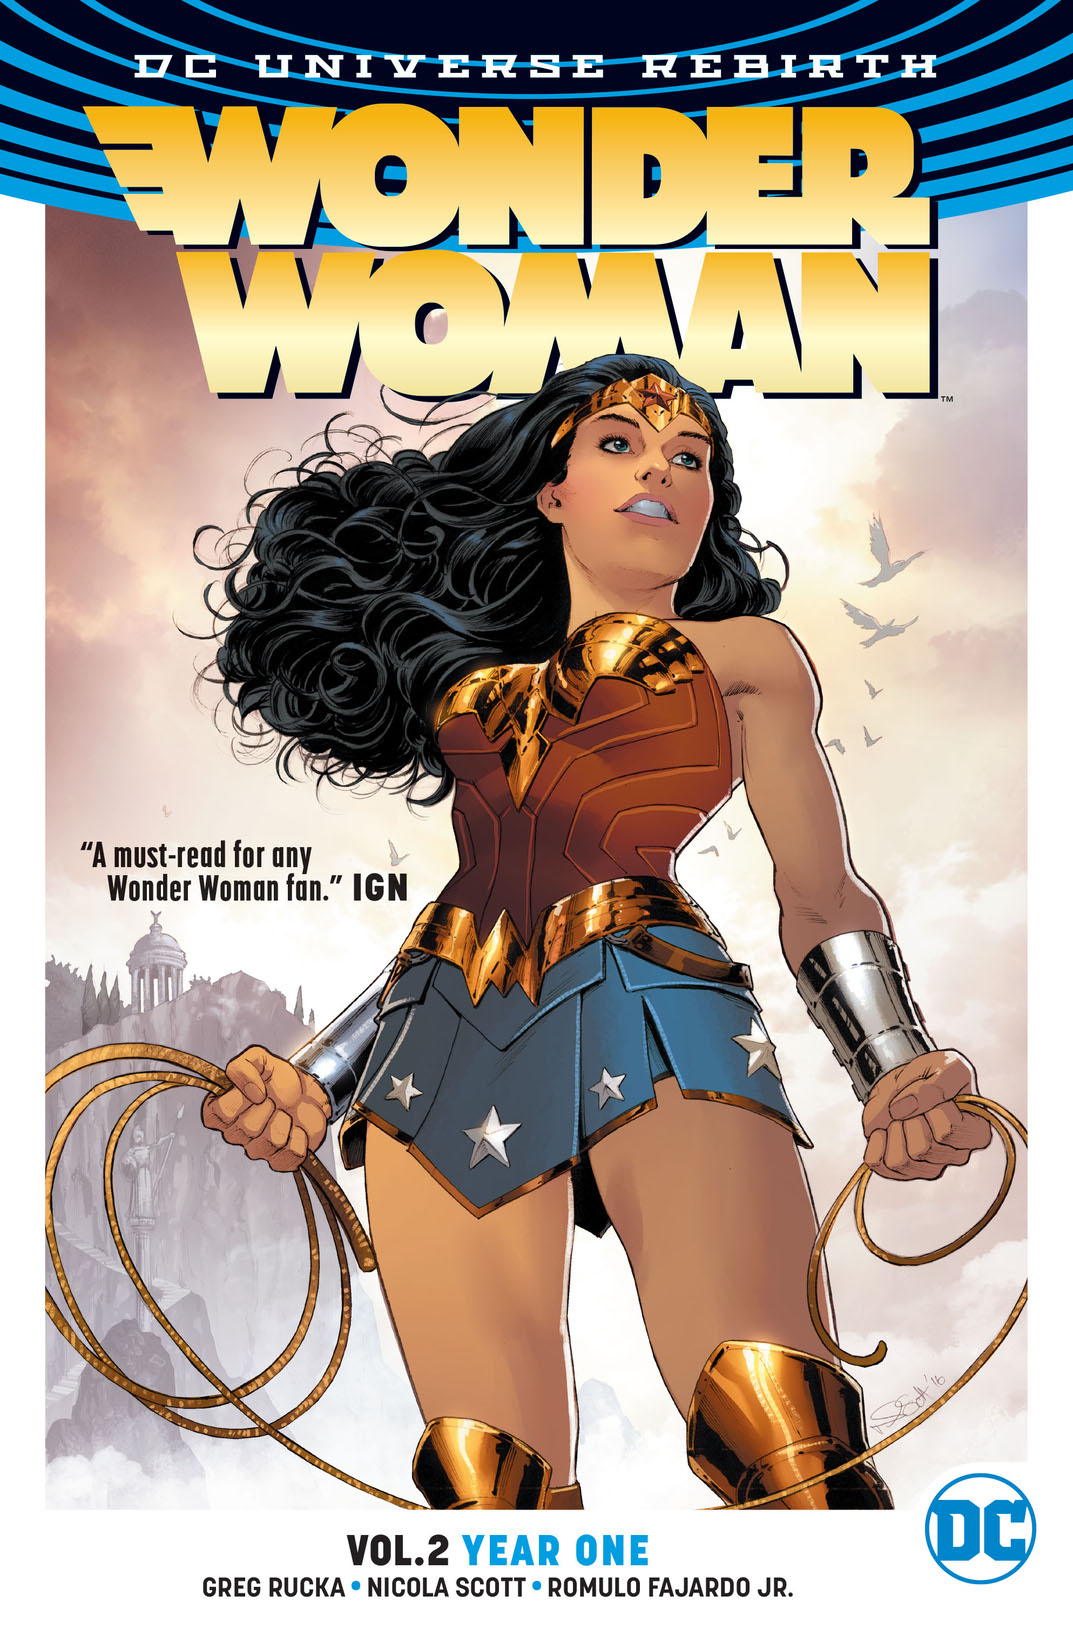 Wonder Woman Vol. 2: Year One preview images